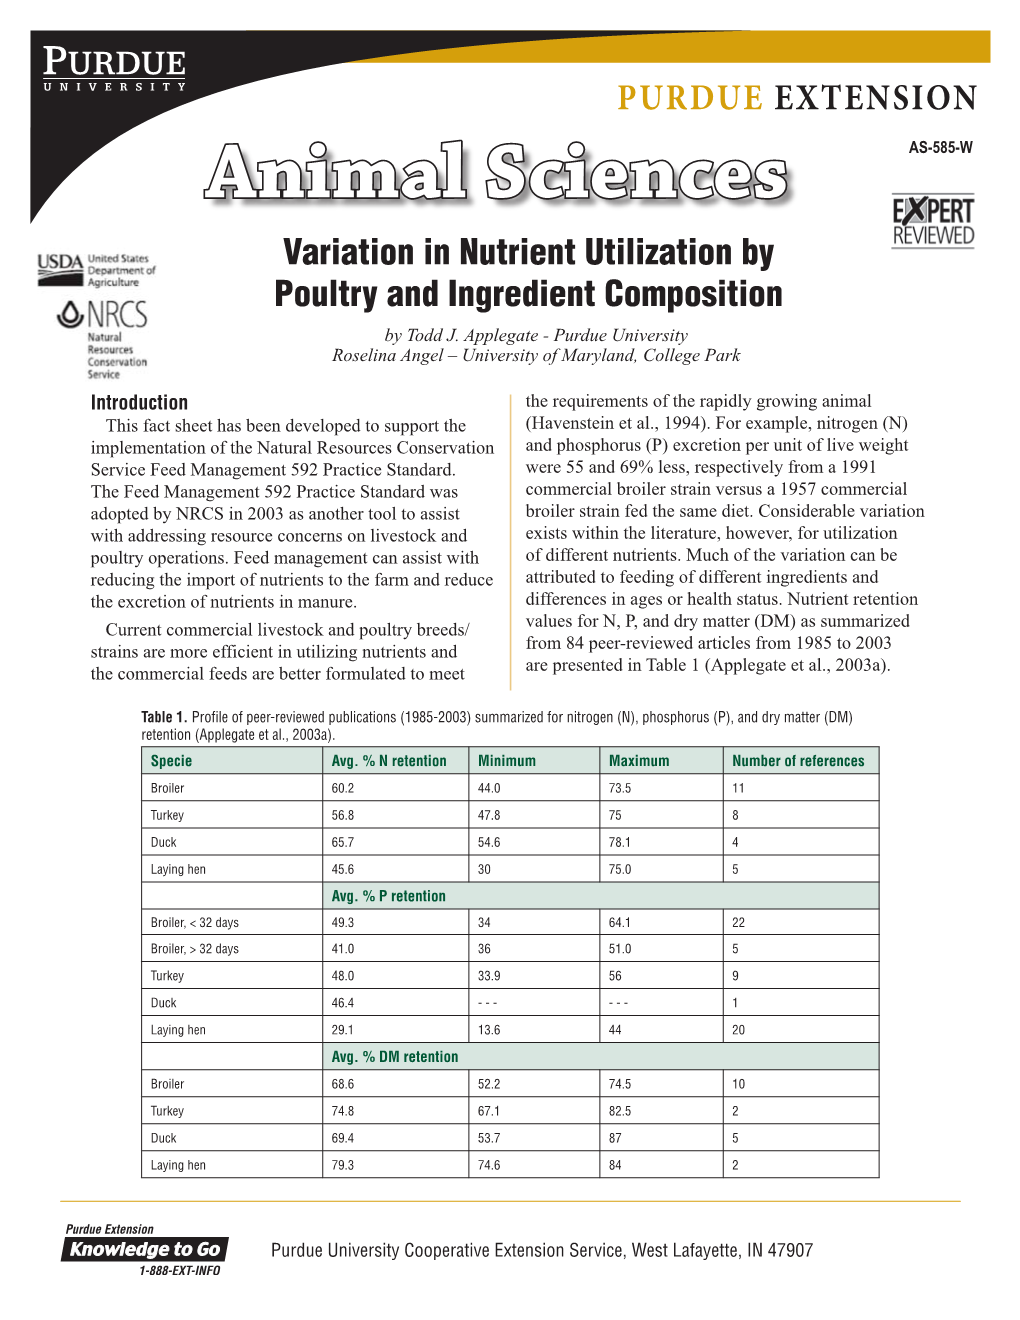 Animal Sciences AS-585-W Variation in Nutrient Utilization by Poultry and Ingredient Composition by Todd J